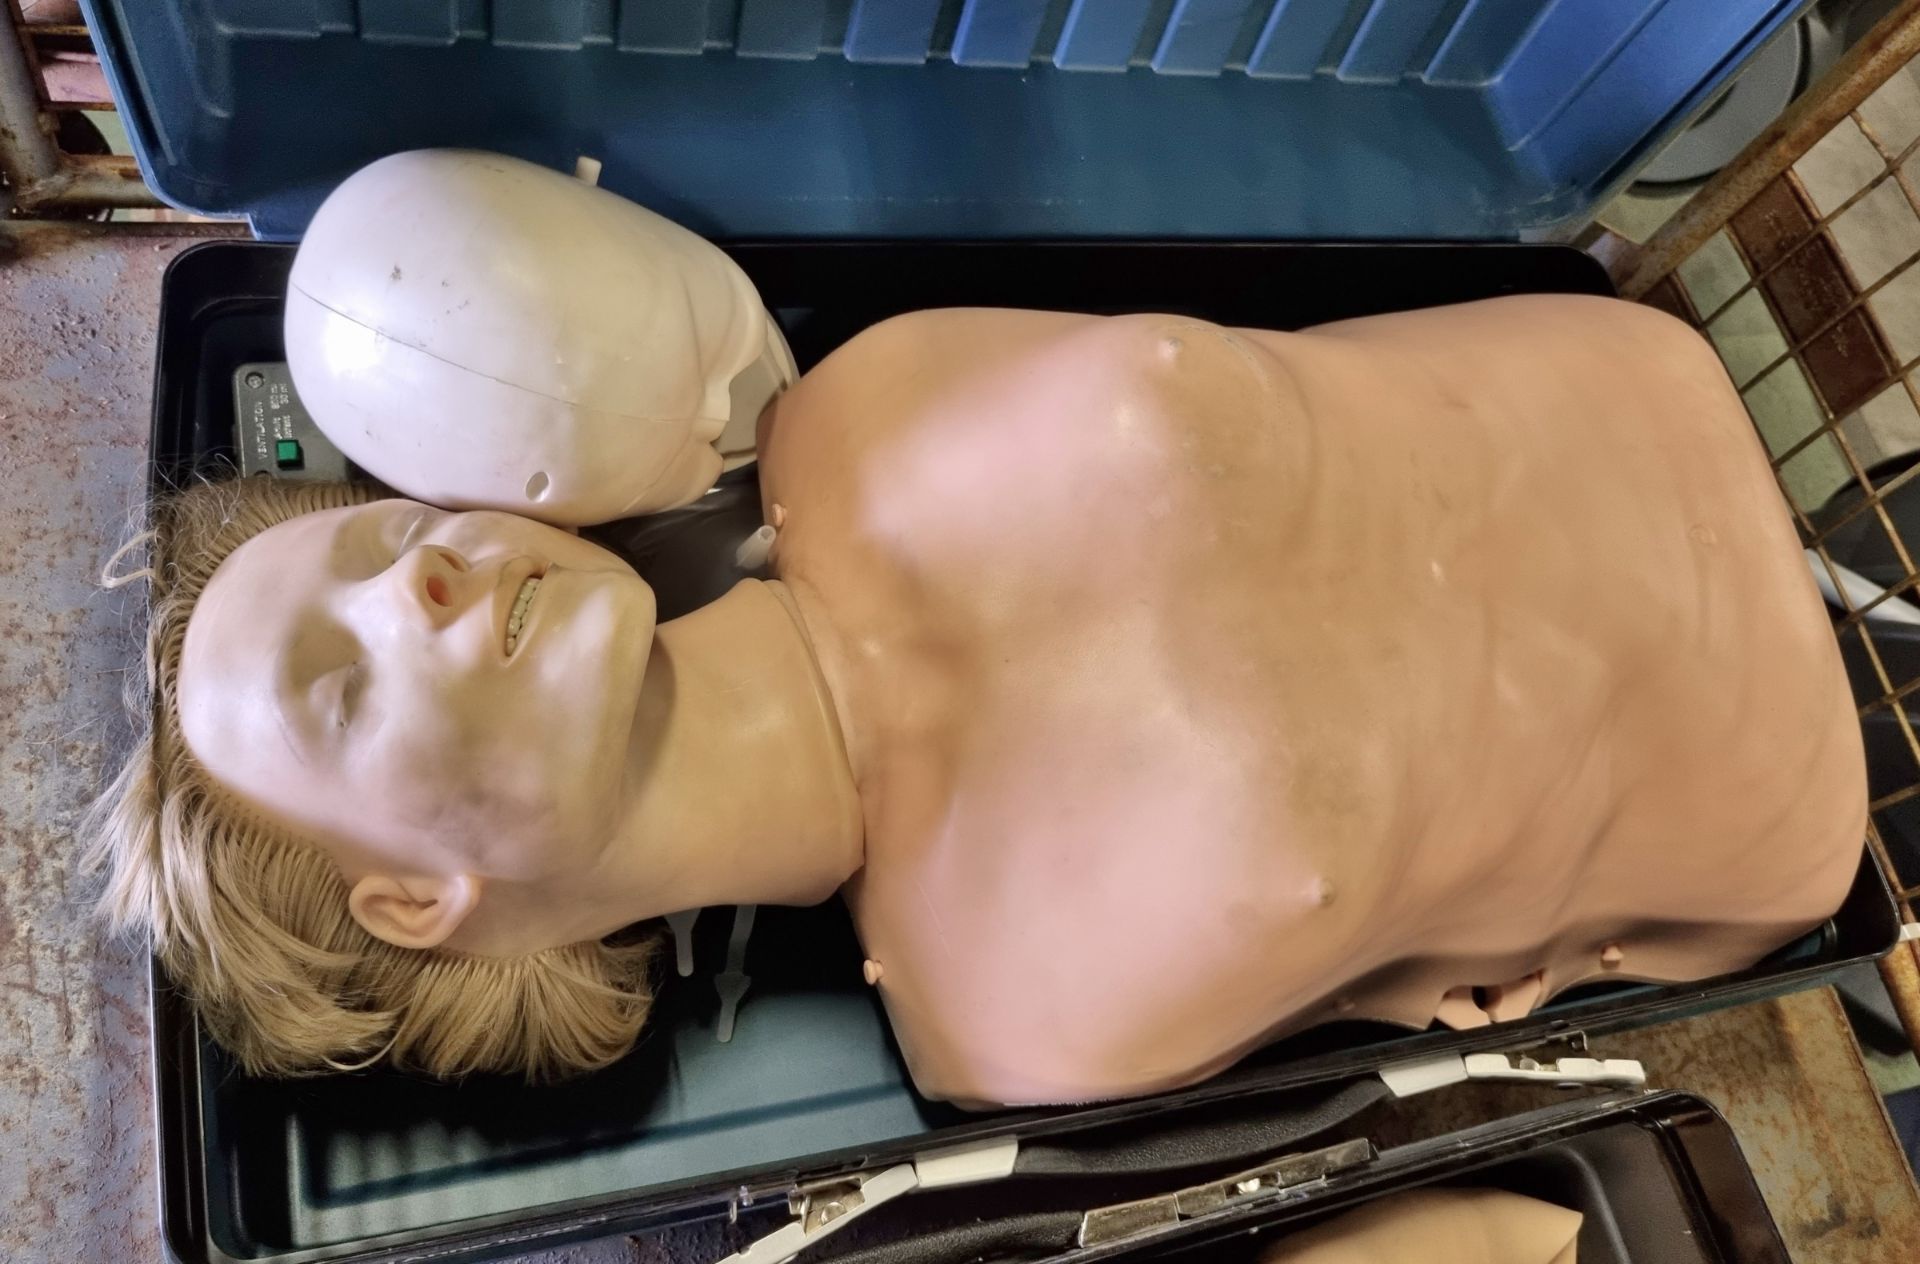 2x Laerdal Resusci Anne Torso CPR medical training dummies in cases - Image 5 of 6